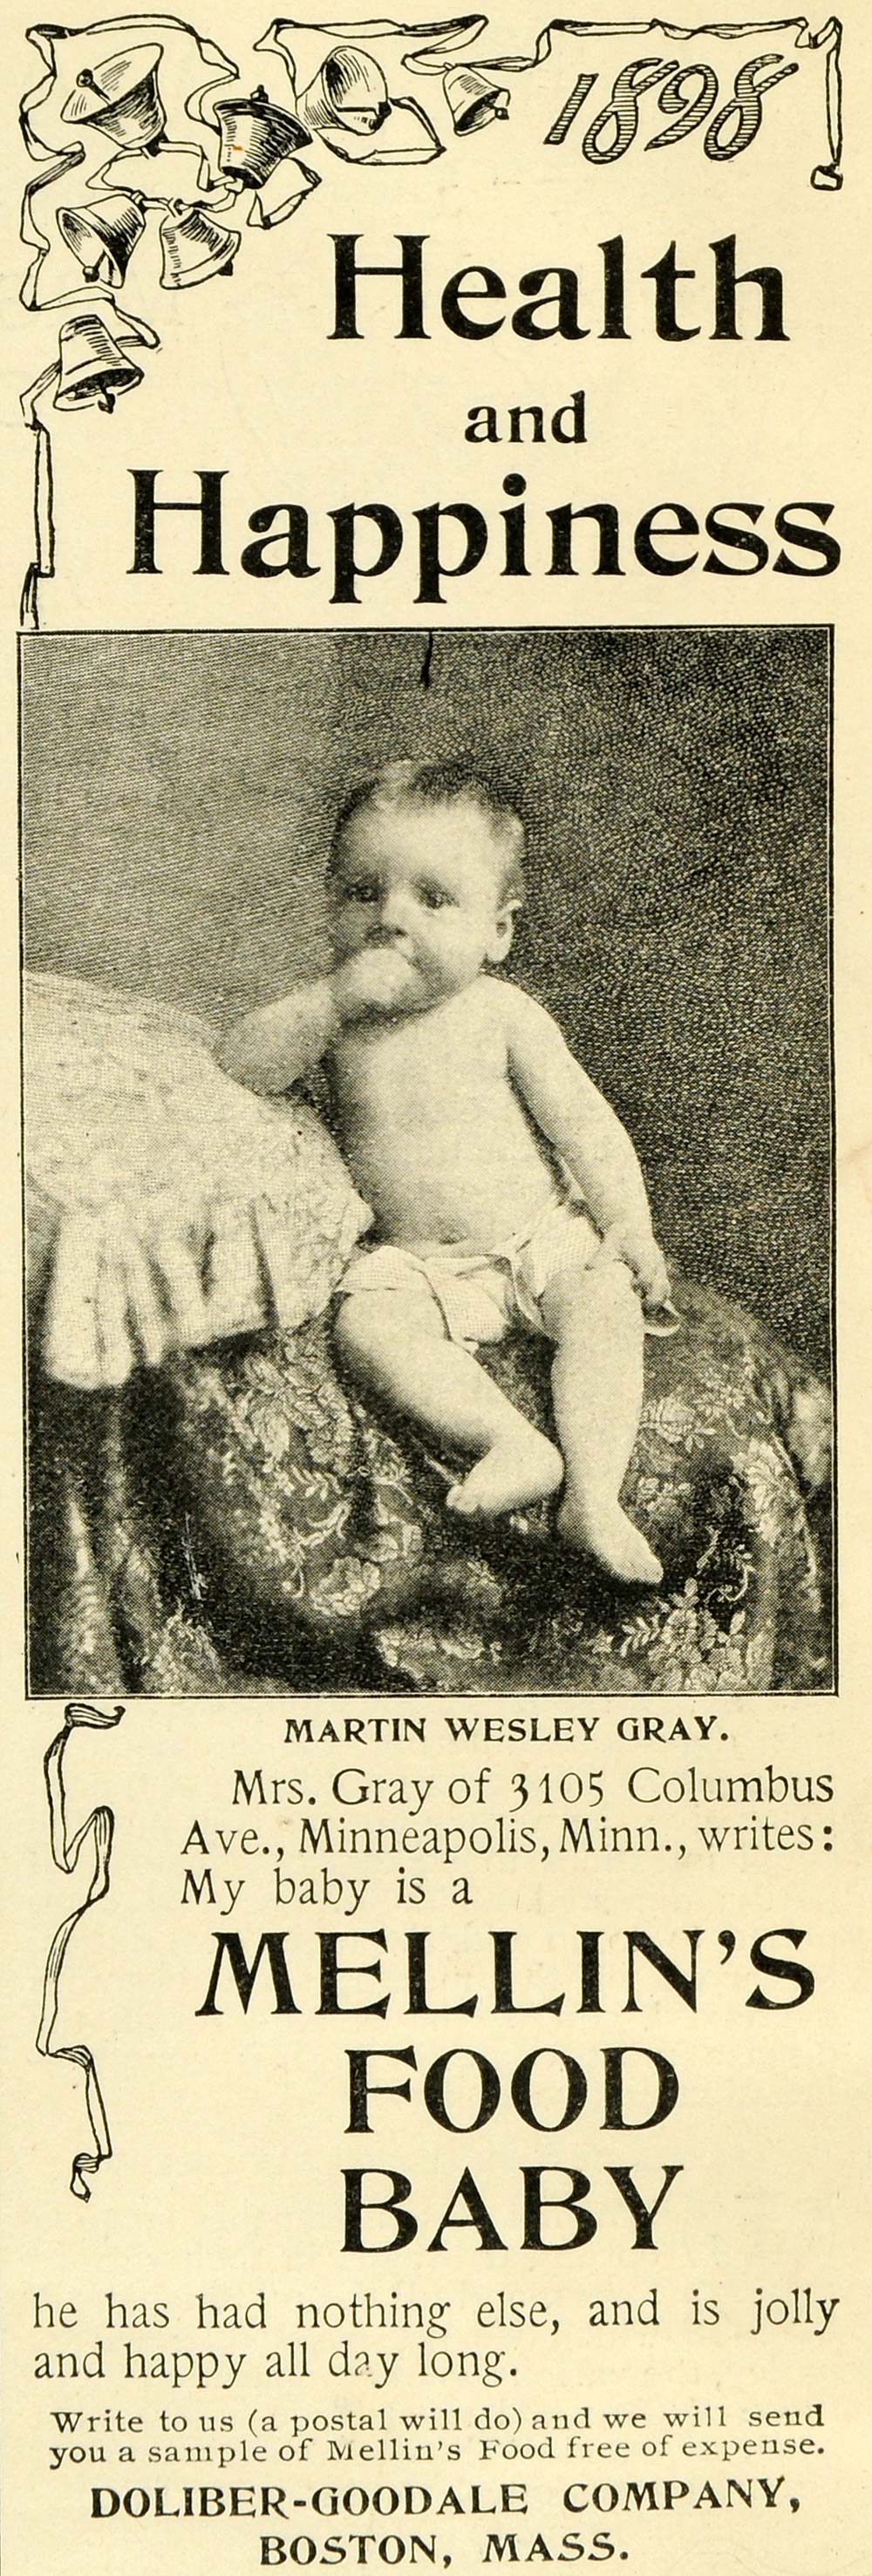 1898 Ad Doliber-Goodale Mellin Baby Food Infant Martin Wesley Gray Diaper LHJ6